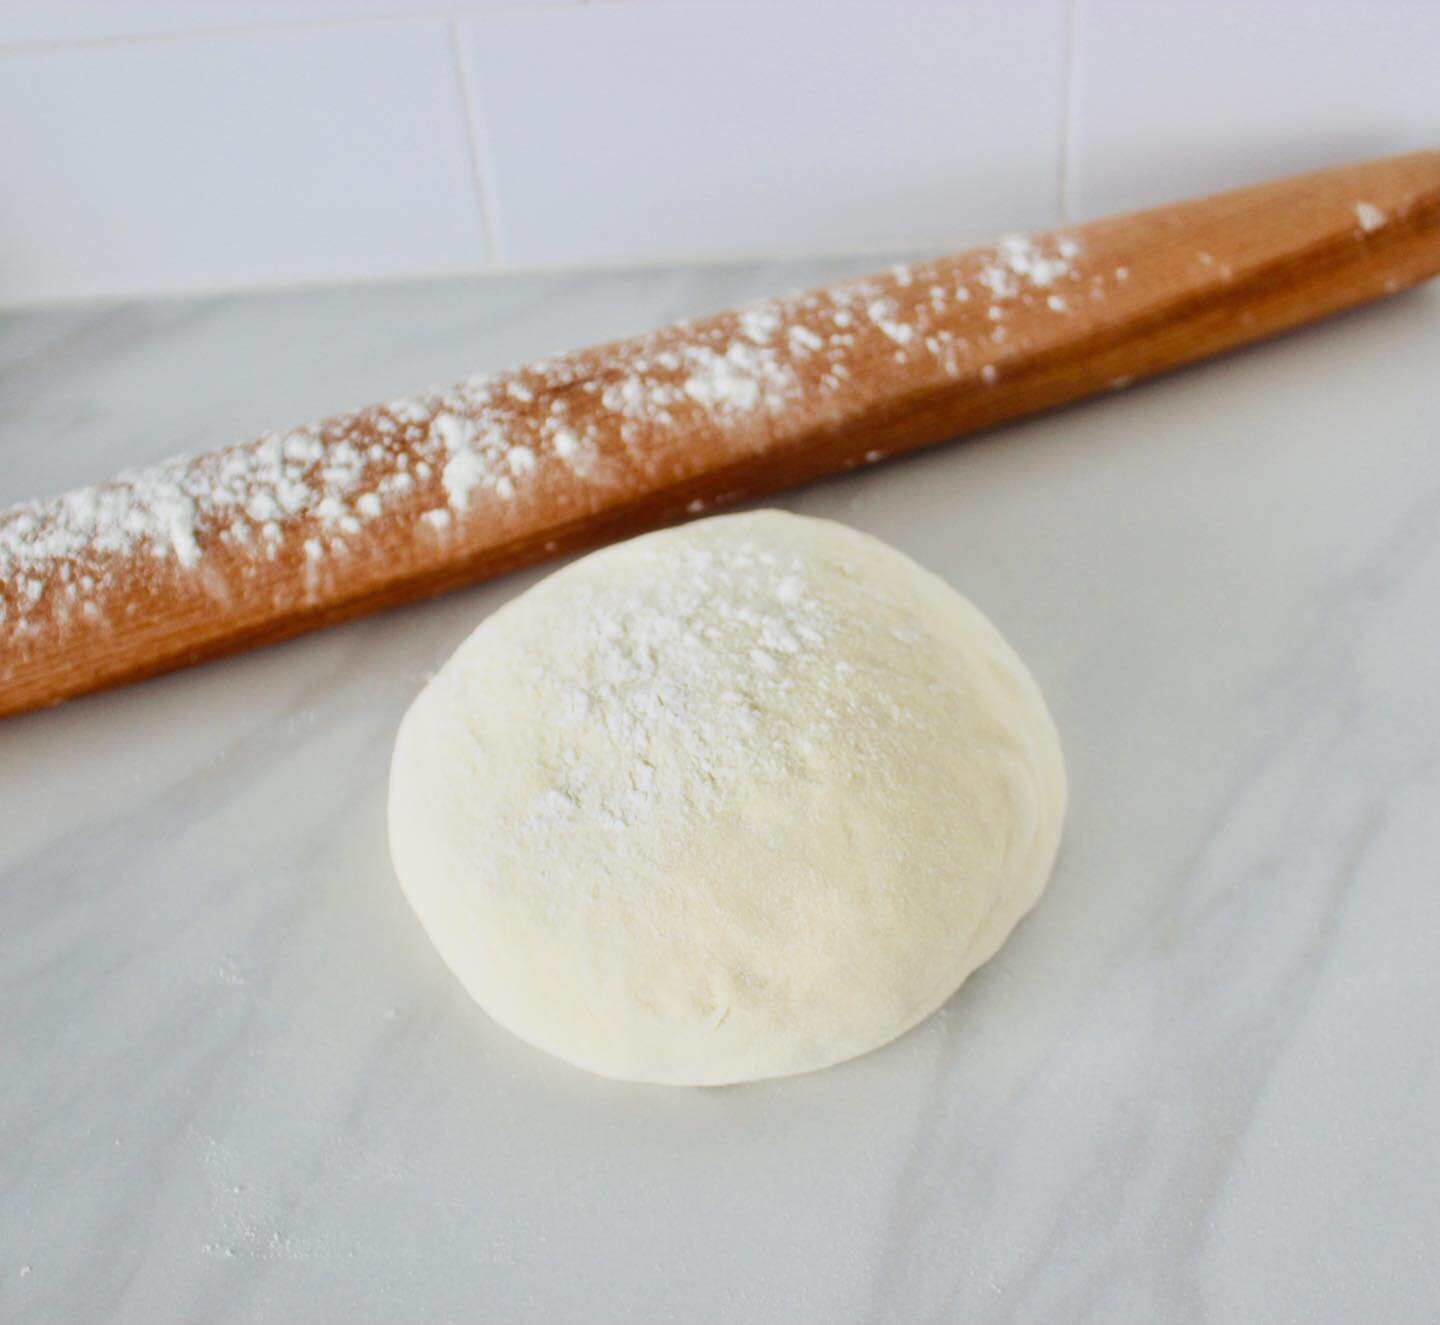 Don&rsquo;t forget to checkout our homemade dough section on the website where we have pizza dough, pizza kits, and fresh pasta in a variety of cuts. 🍕🍝

Any thoughts about adding a rustic loaf bread, delivered warm and made/baked to order?? 👀👀